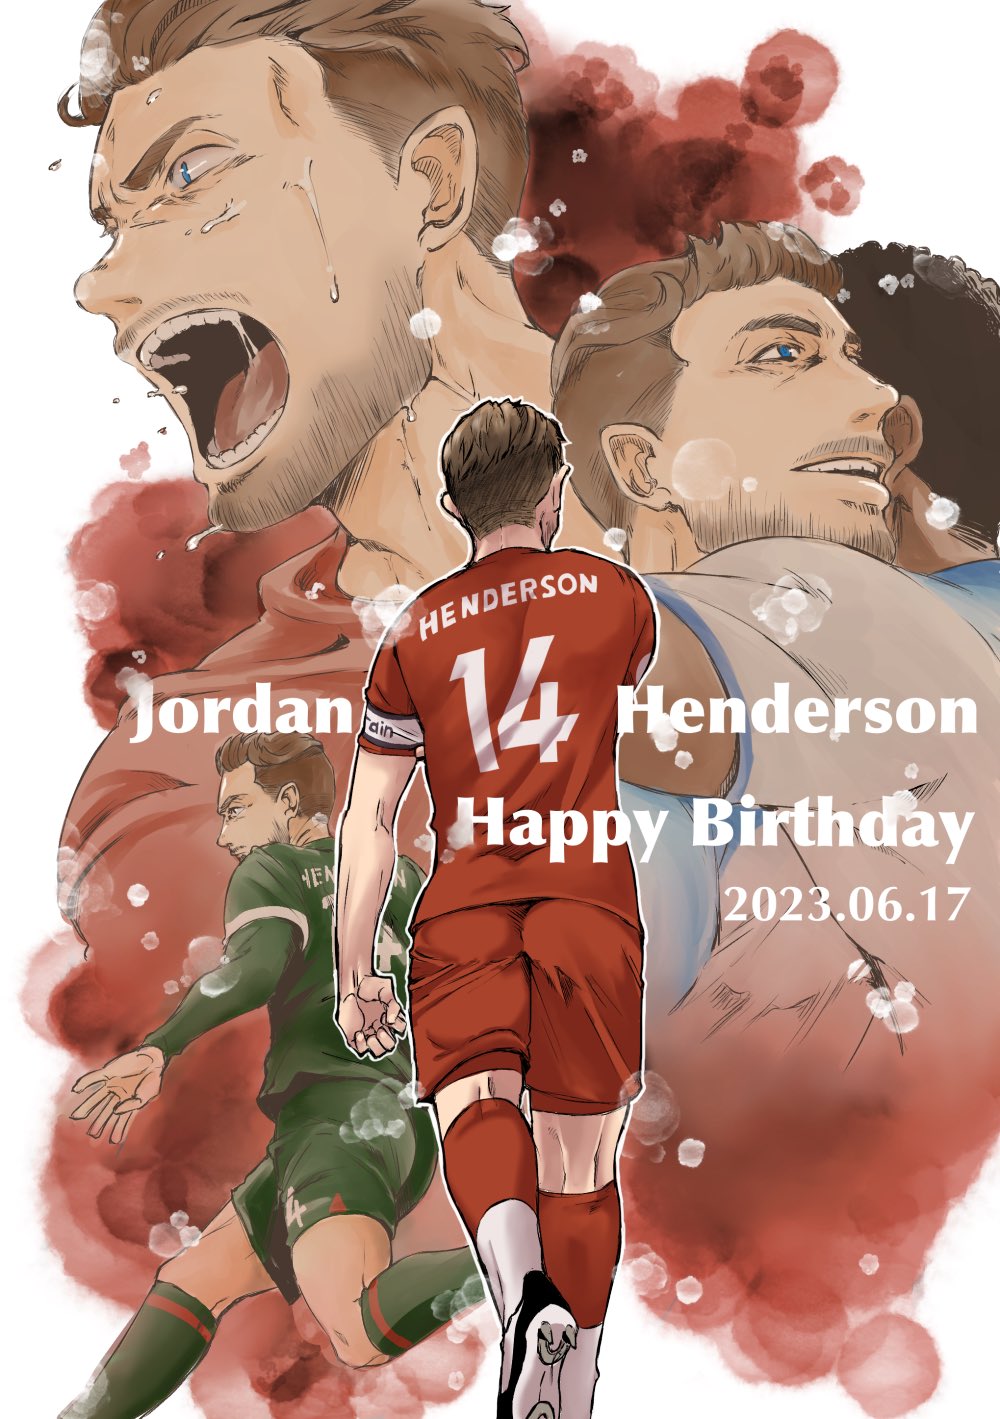 Happy 33rd Birthday to reds skipper,Jordan Henderson!!!     I sincerely wish for your happiness  